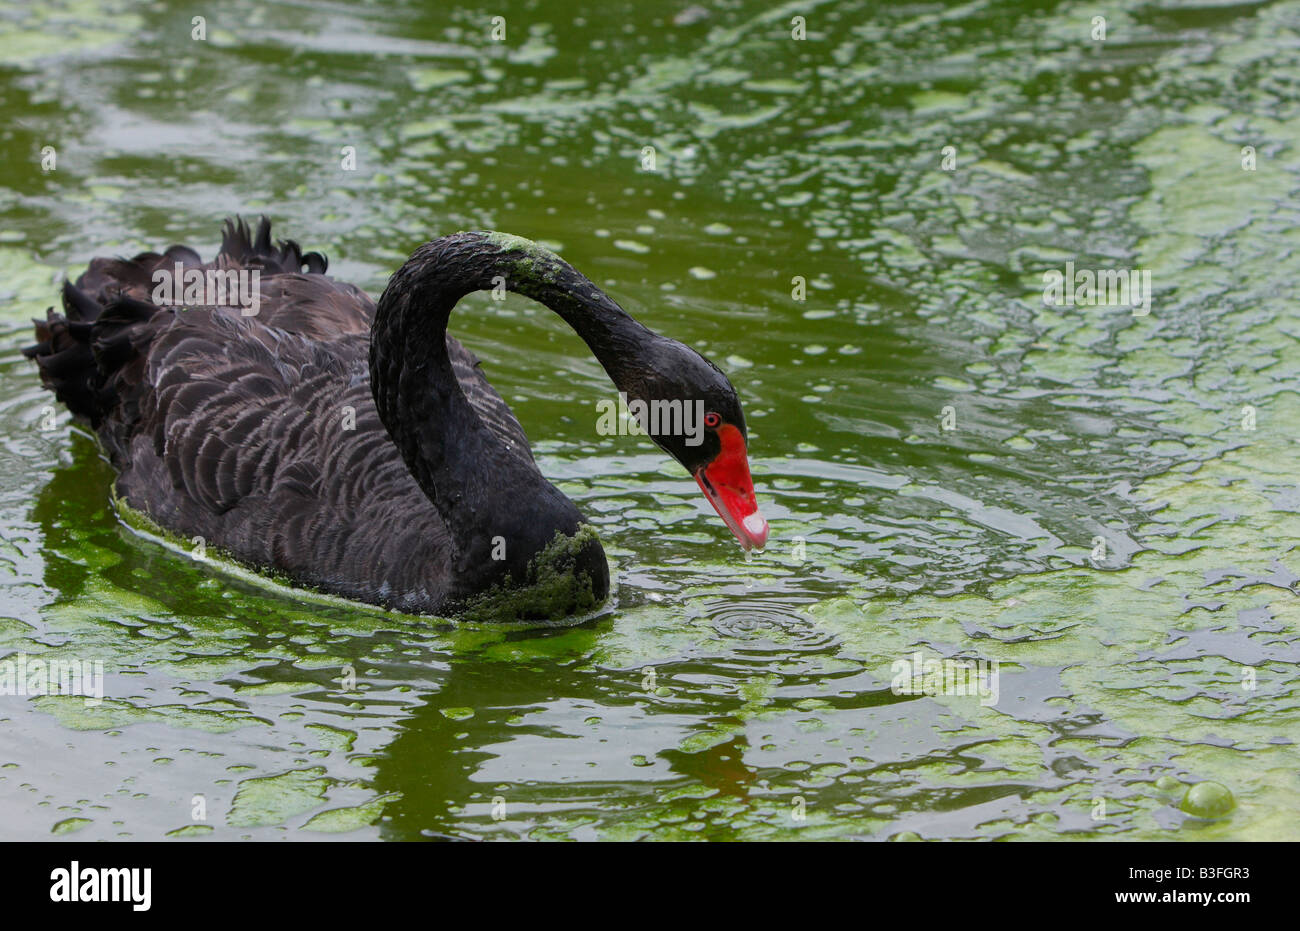 Black swan, Cygnus atratus, swimming in pond water covered with algal bloom Stock Photo